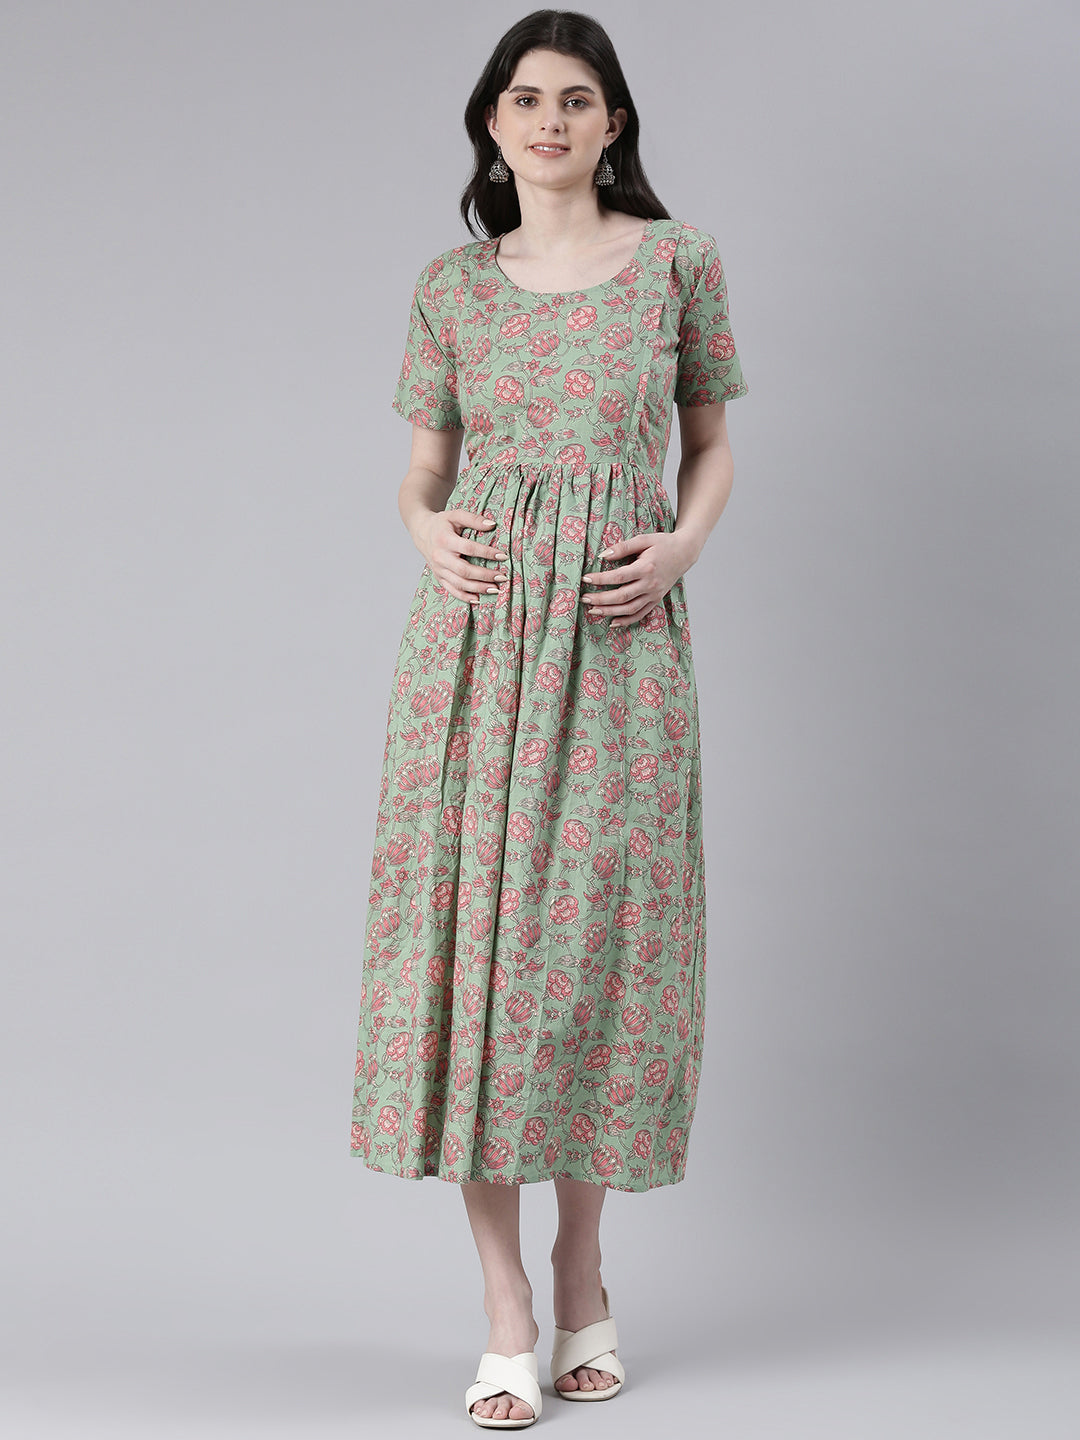 Sea green and pink Floral Print Maternity Fit & Flare Midi Ethnic Dress